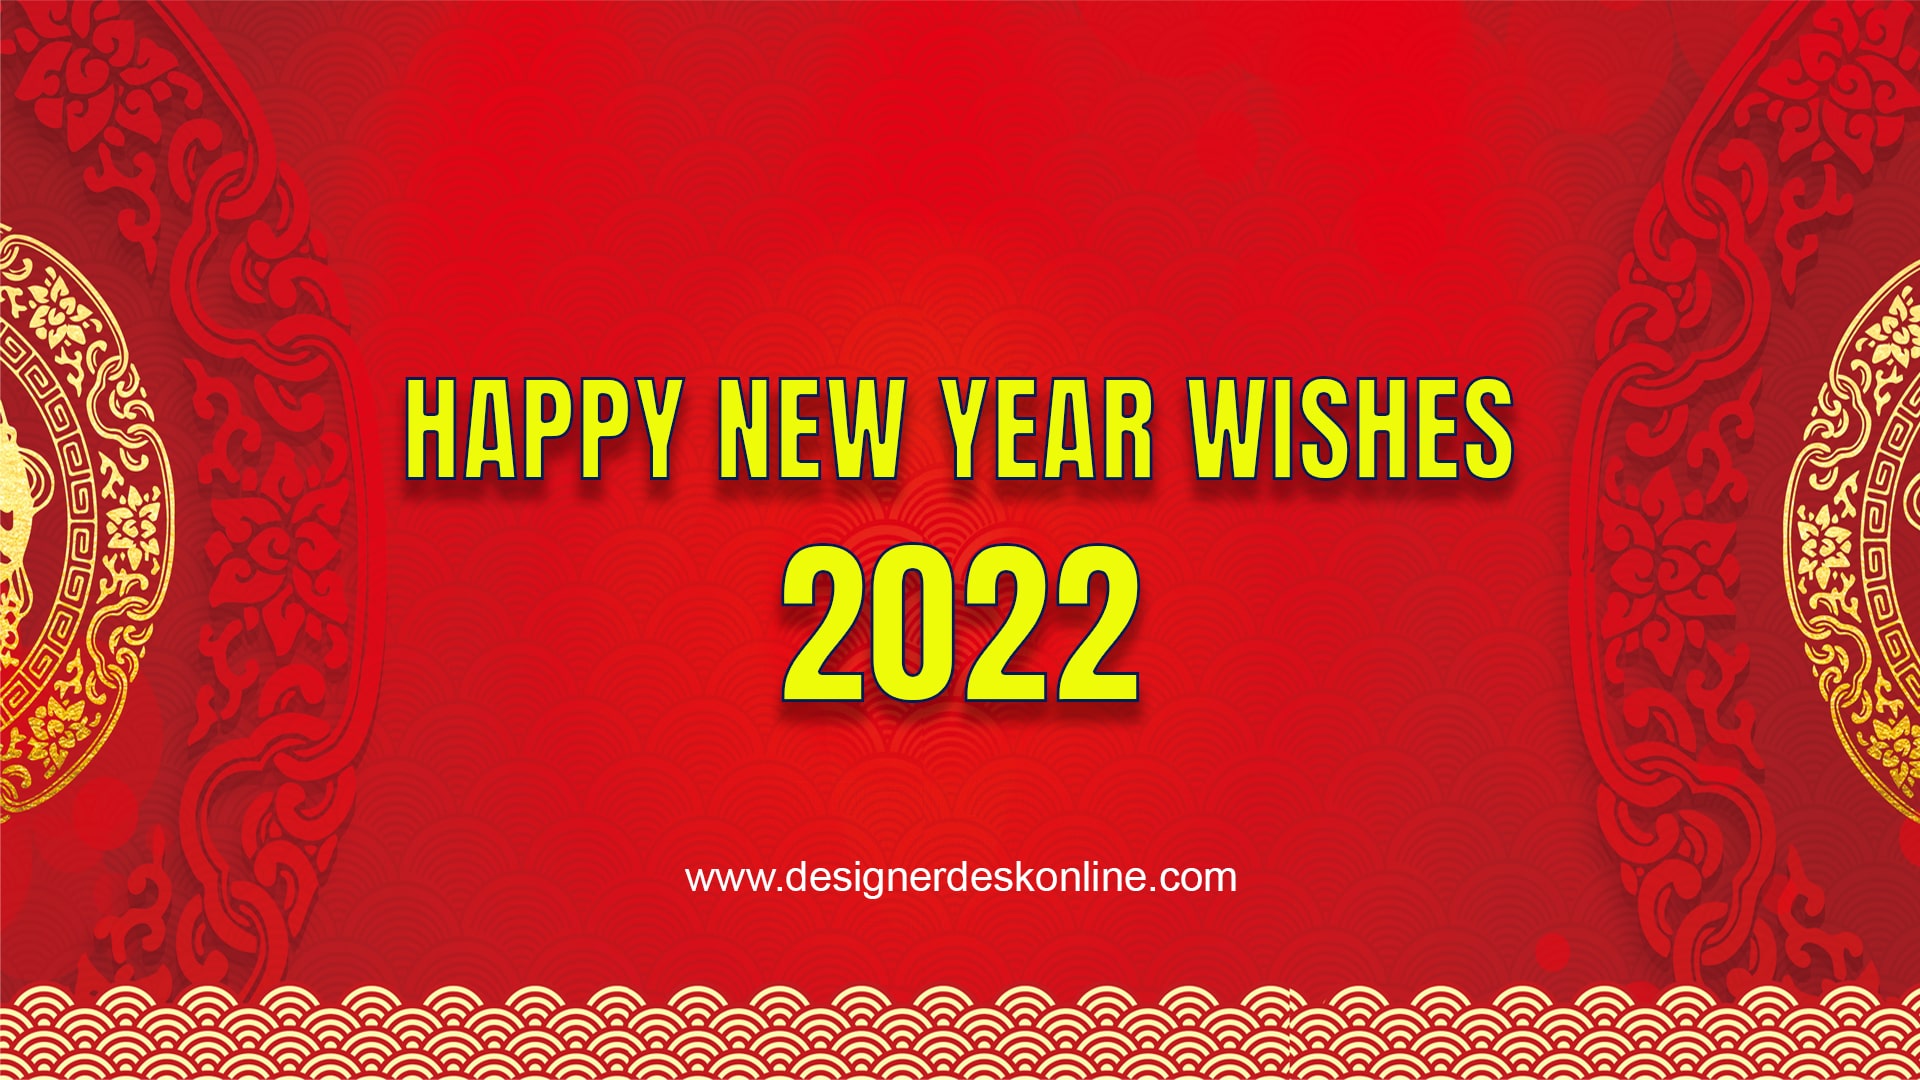 Happy New Year Wishes in Gujrati 2022: Happy New Year 2022 Greetings in Gujrati